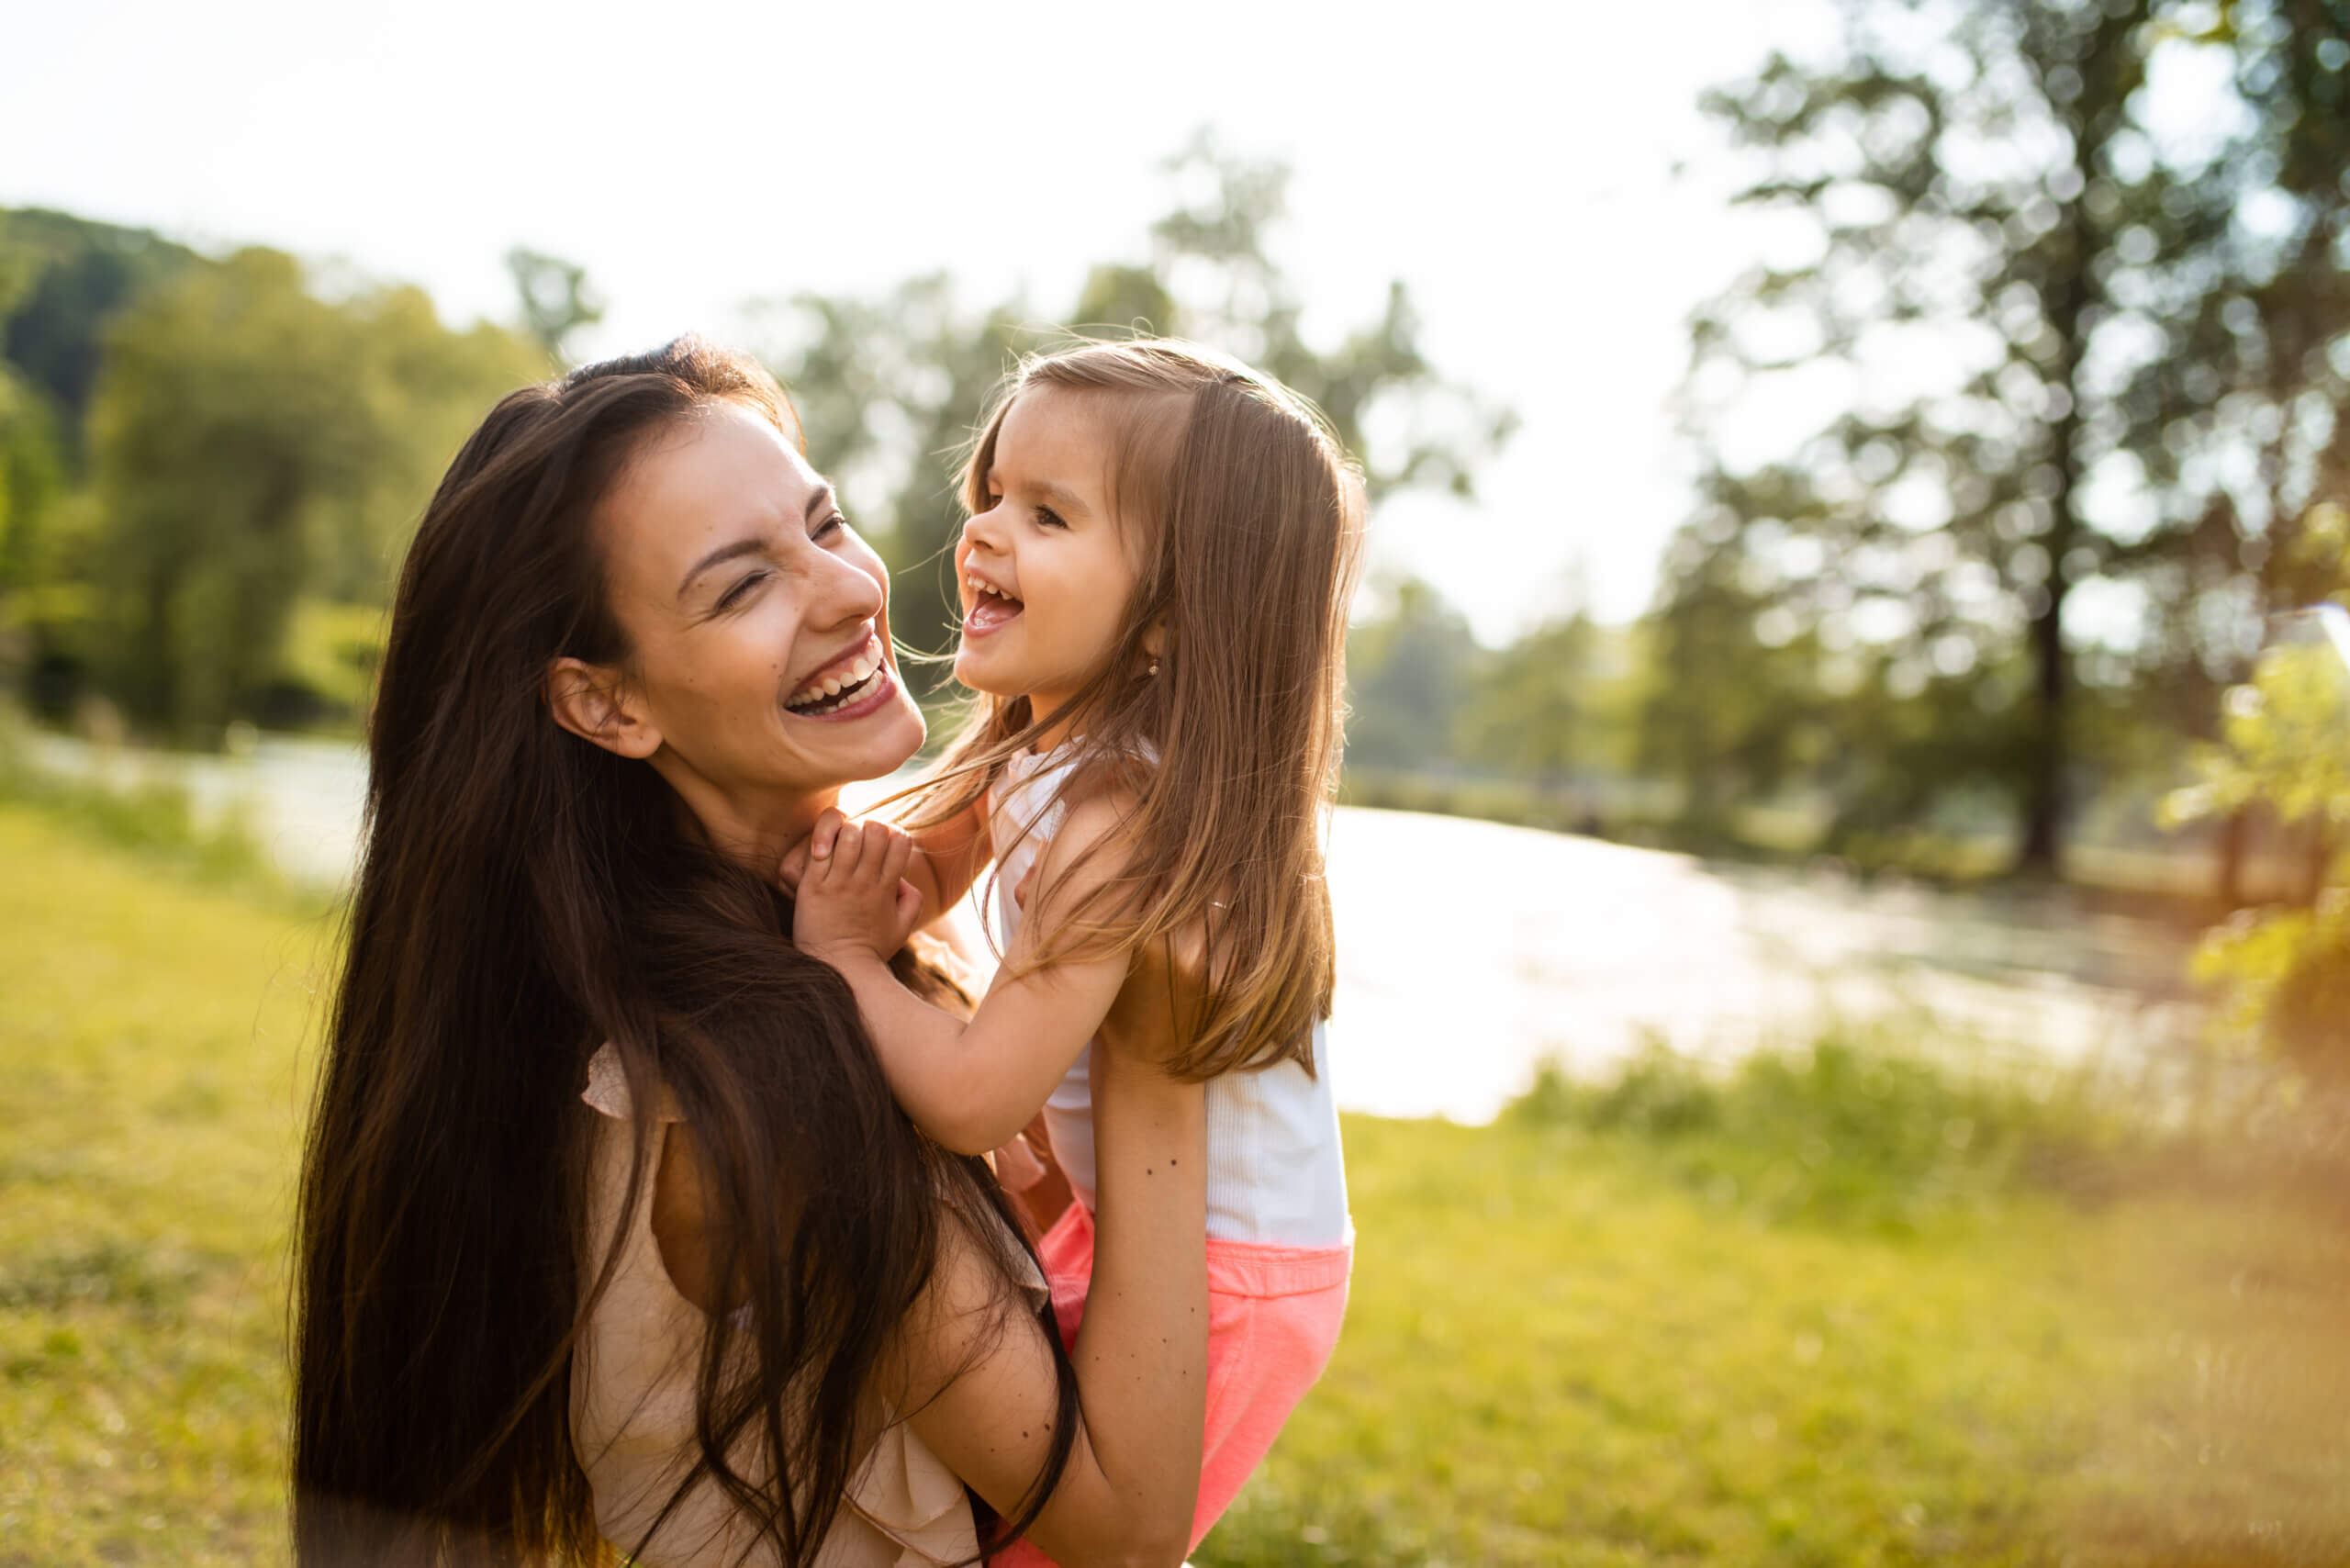 Woman with bright smile holding her daughter